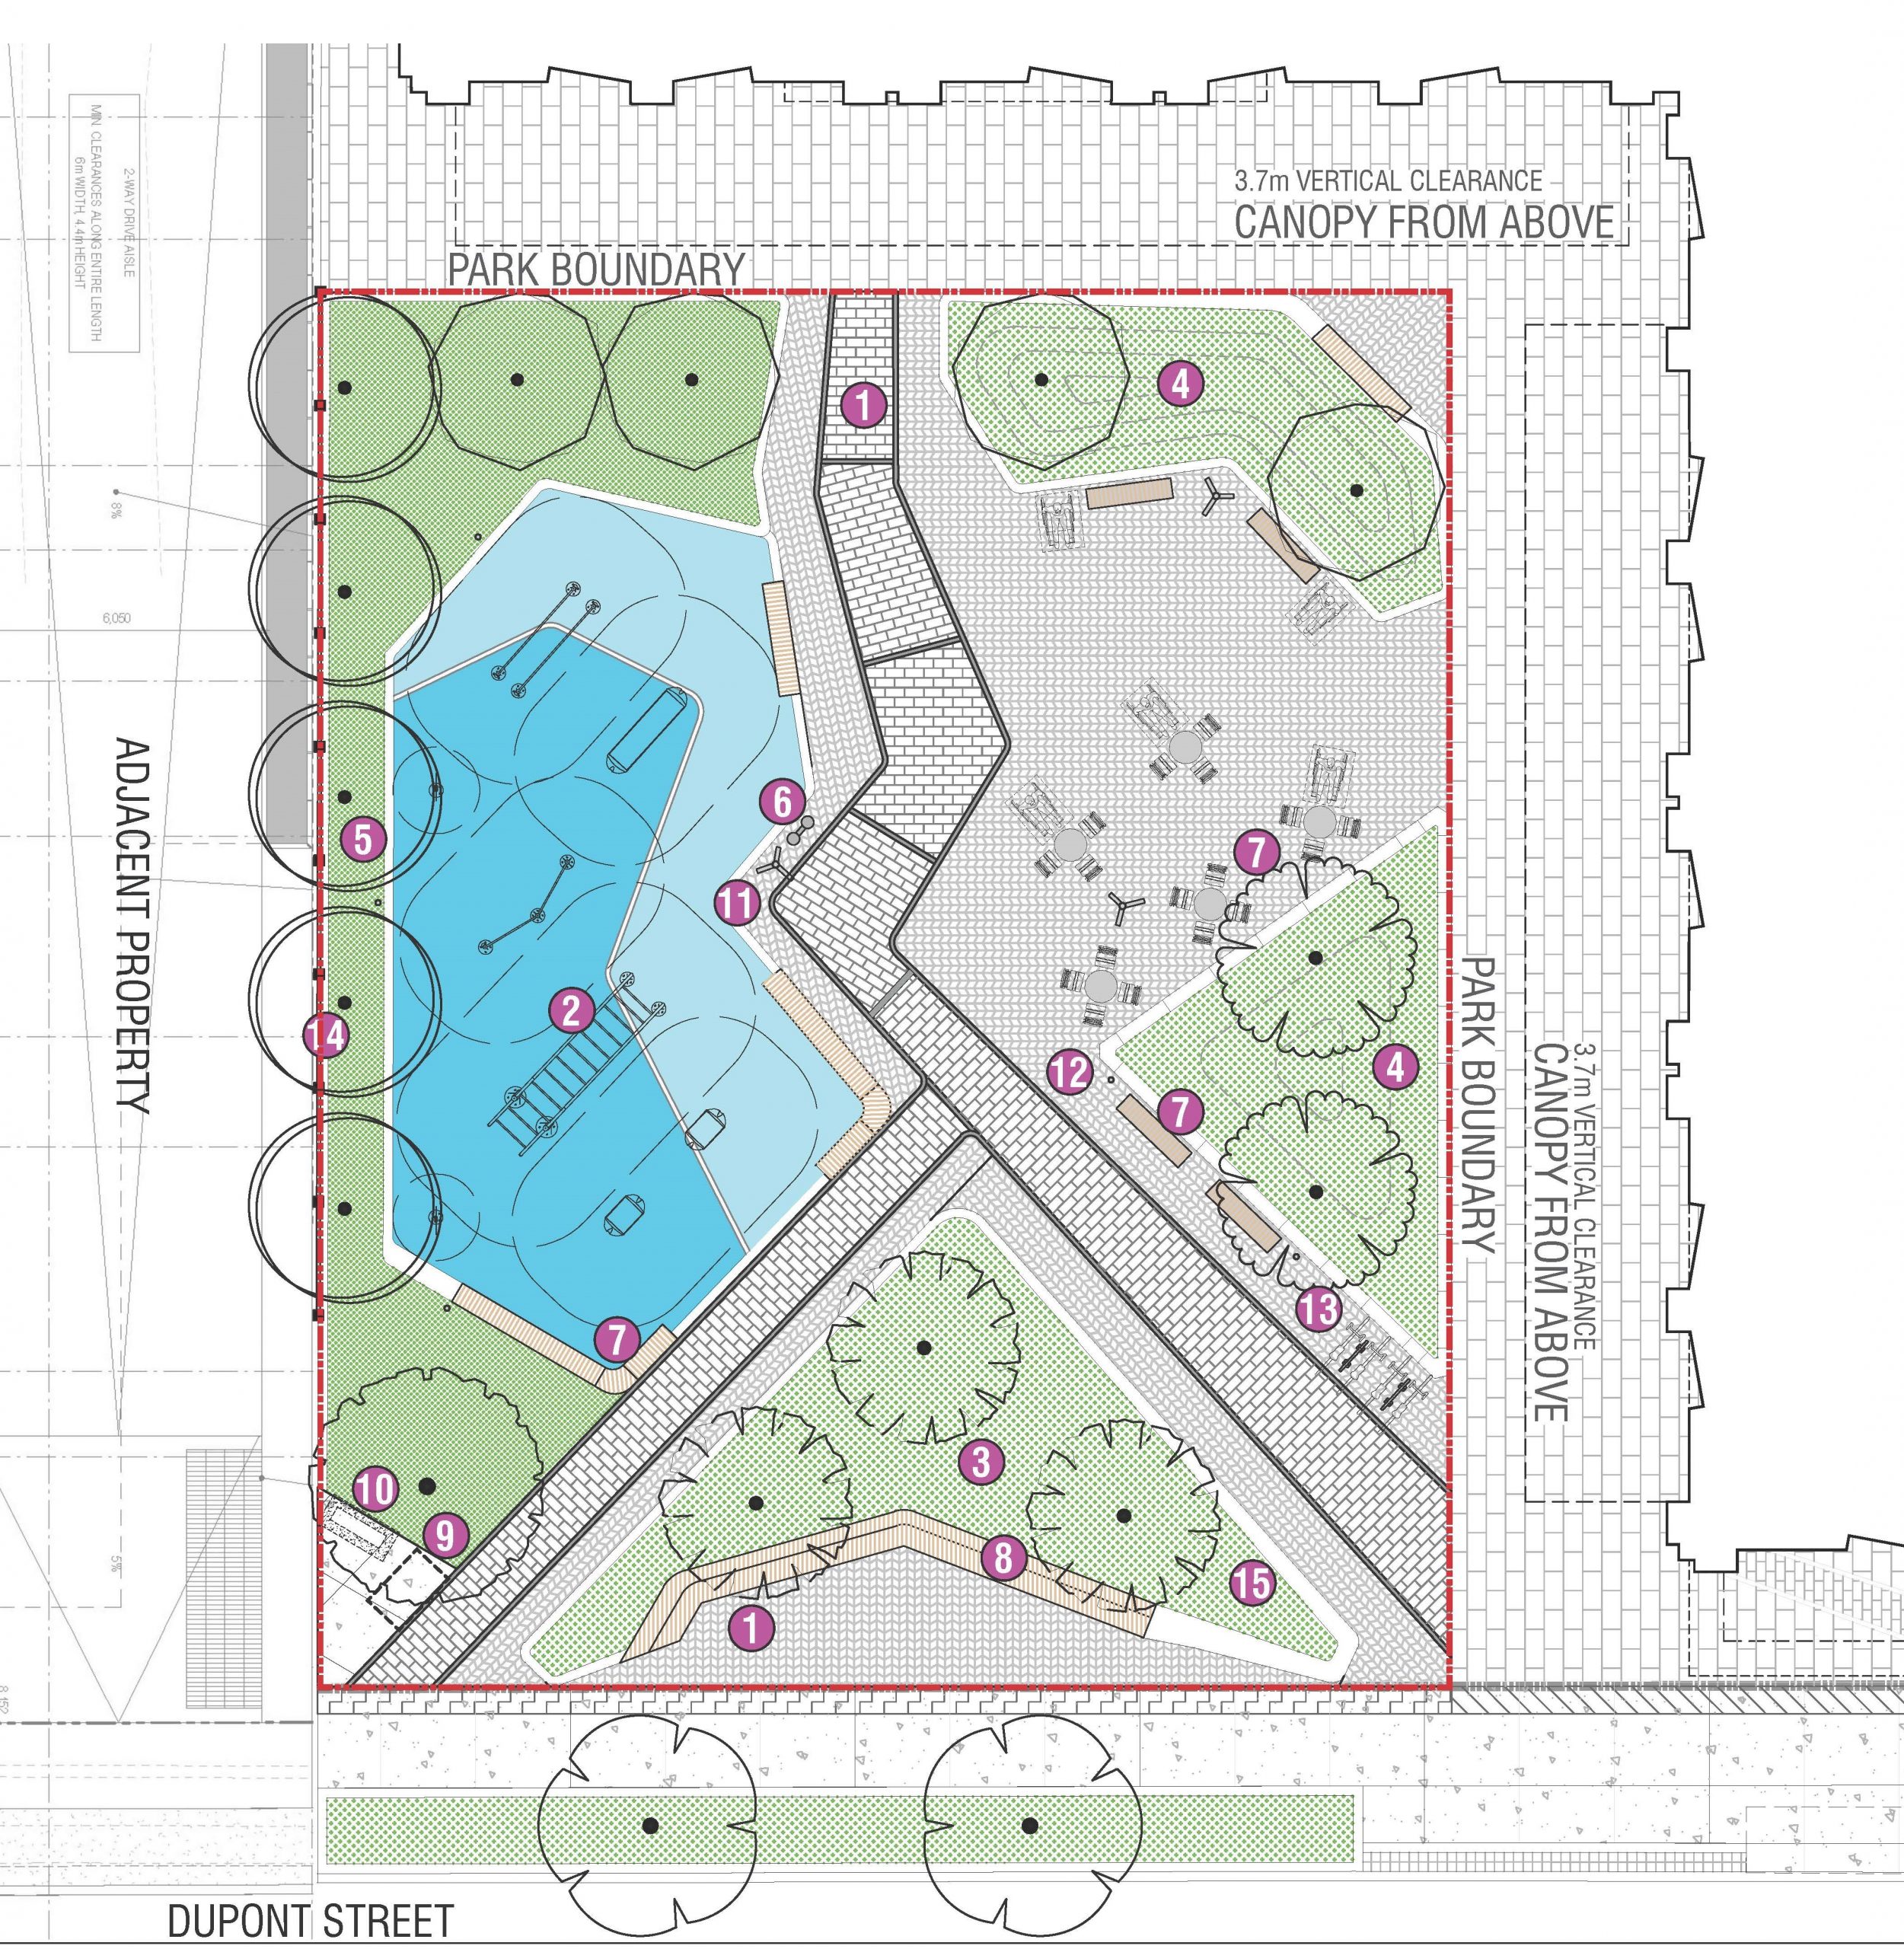 The image shows the Proposed Design in aerial view, with labels indicating park features on the right side. The Proposed Design includes a large play area or fitness area, bench and table seating, bike racks, games tables, and lighting.